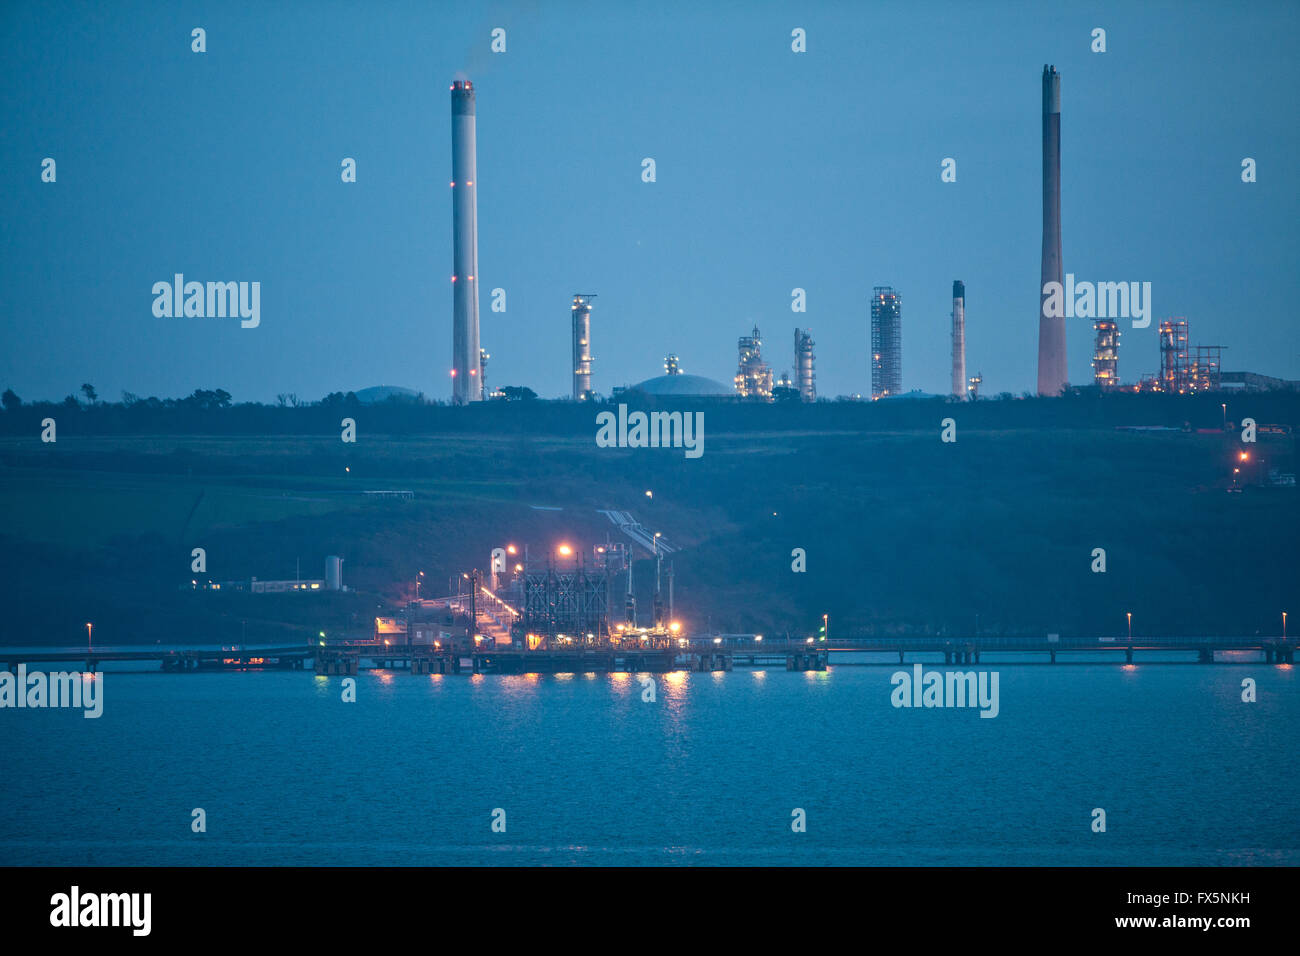 Milford Haven oil refinery taken from Pembroke, Pembrokeshire. Wales now has a coastal path the entire length of its coastline. Stock Photo